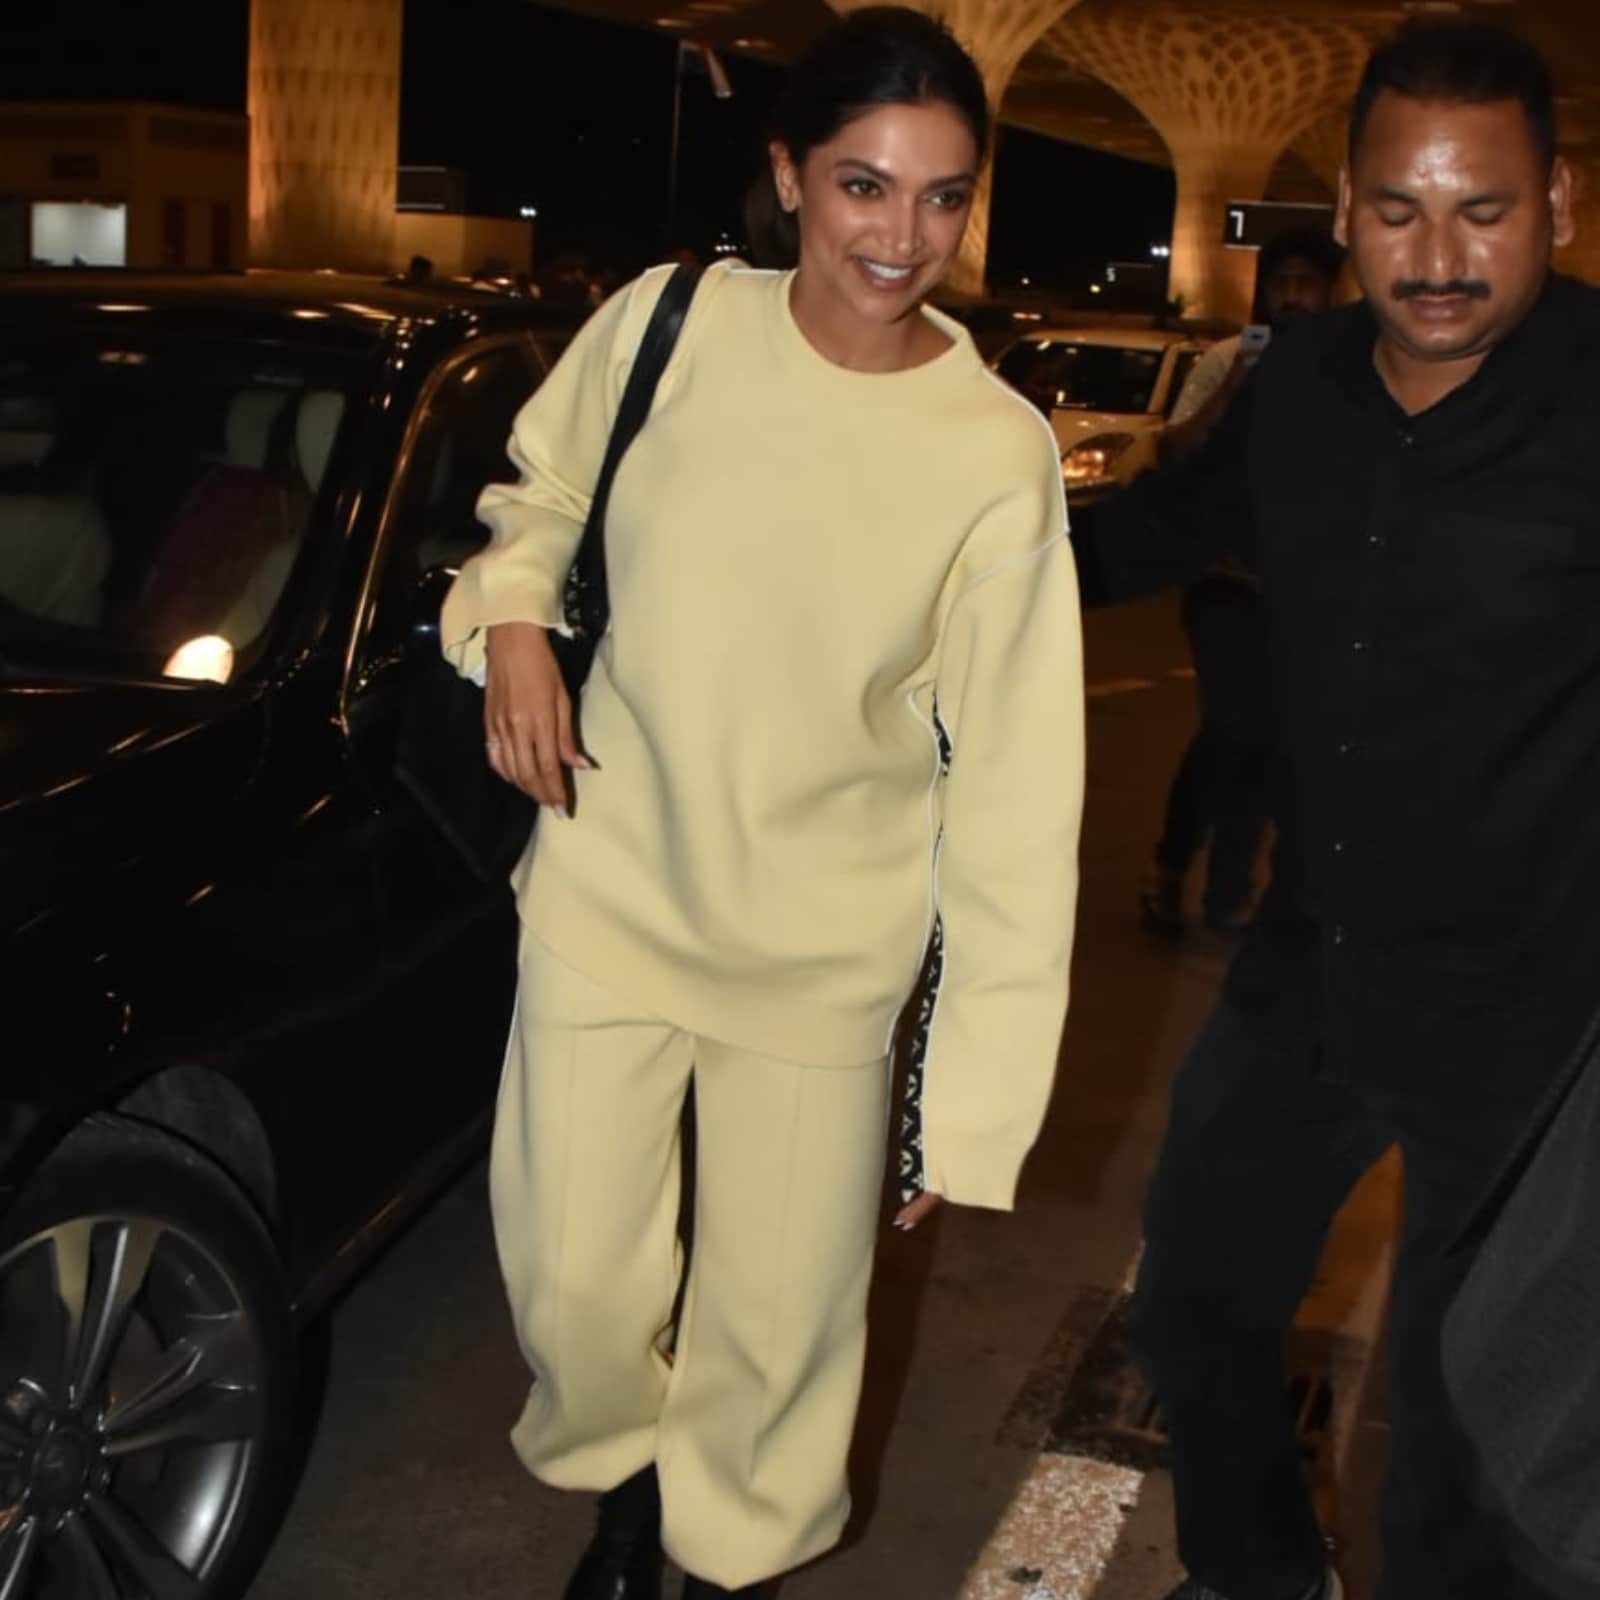 Deepika Padukone At Cannes 2022: Makes First Official Appearance At Jury  Dinner In Louis Vuitton Dress, See Pics - News18